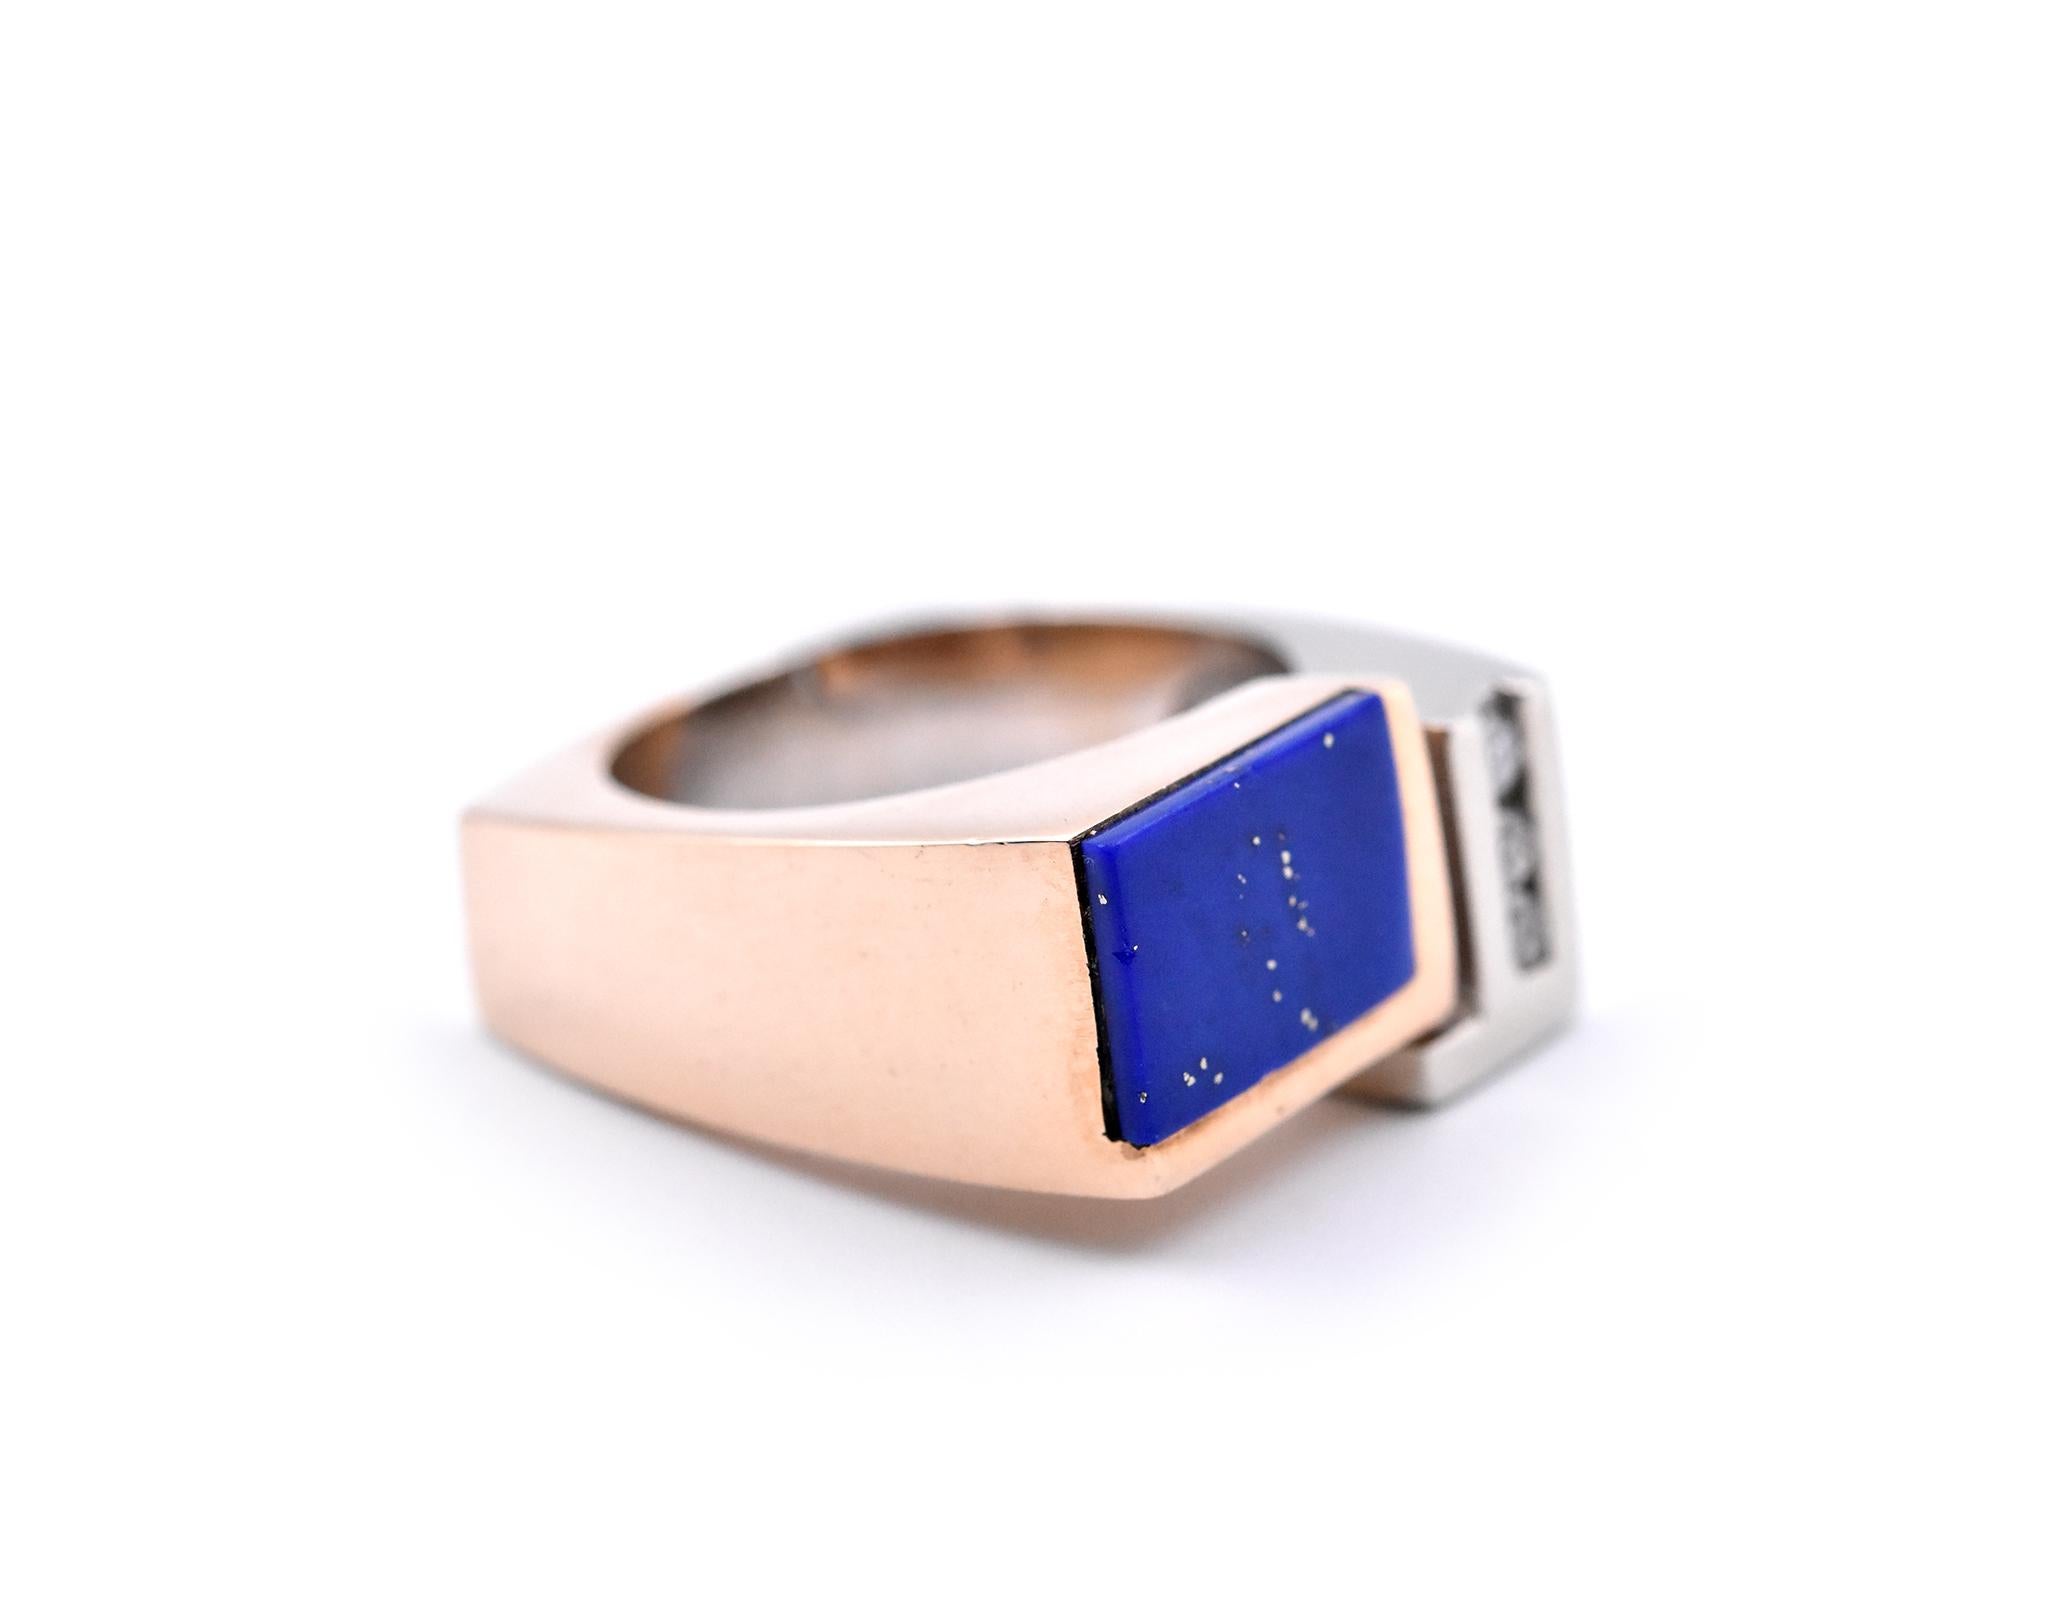 Designer: custom 
Material: 14k yellow/white gold 
Lapis Lazuli: 1 rectangular cut lapis
Diamonds: 3 round brilliant cuts = 0.09cttw
Size: 7 ¼ (please allow two additional shipping days for sizing requests)  
Dimensions: ring measures 9.50mm in